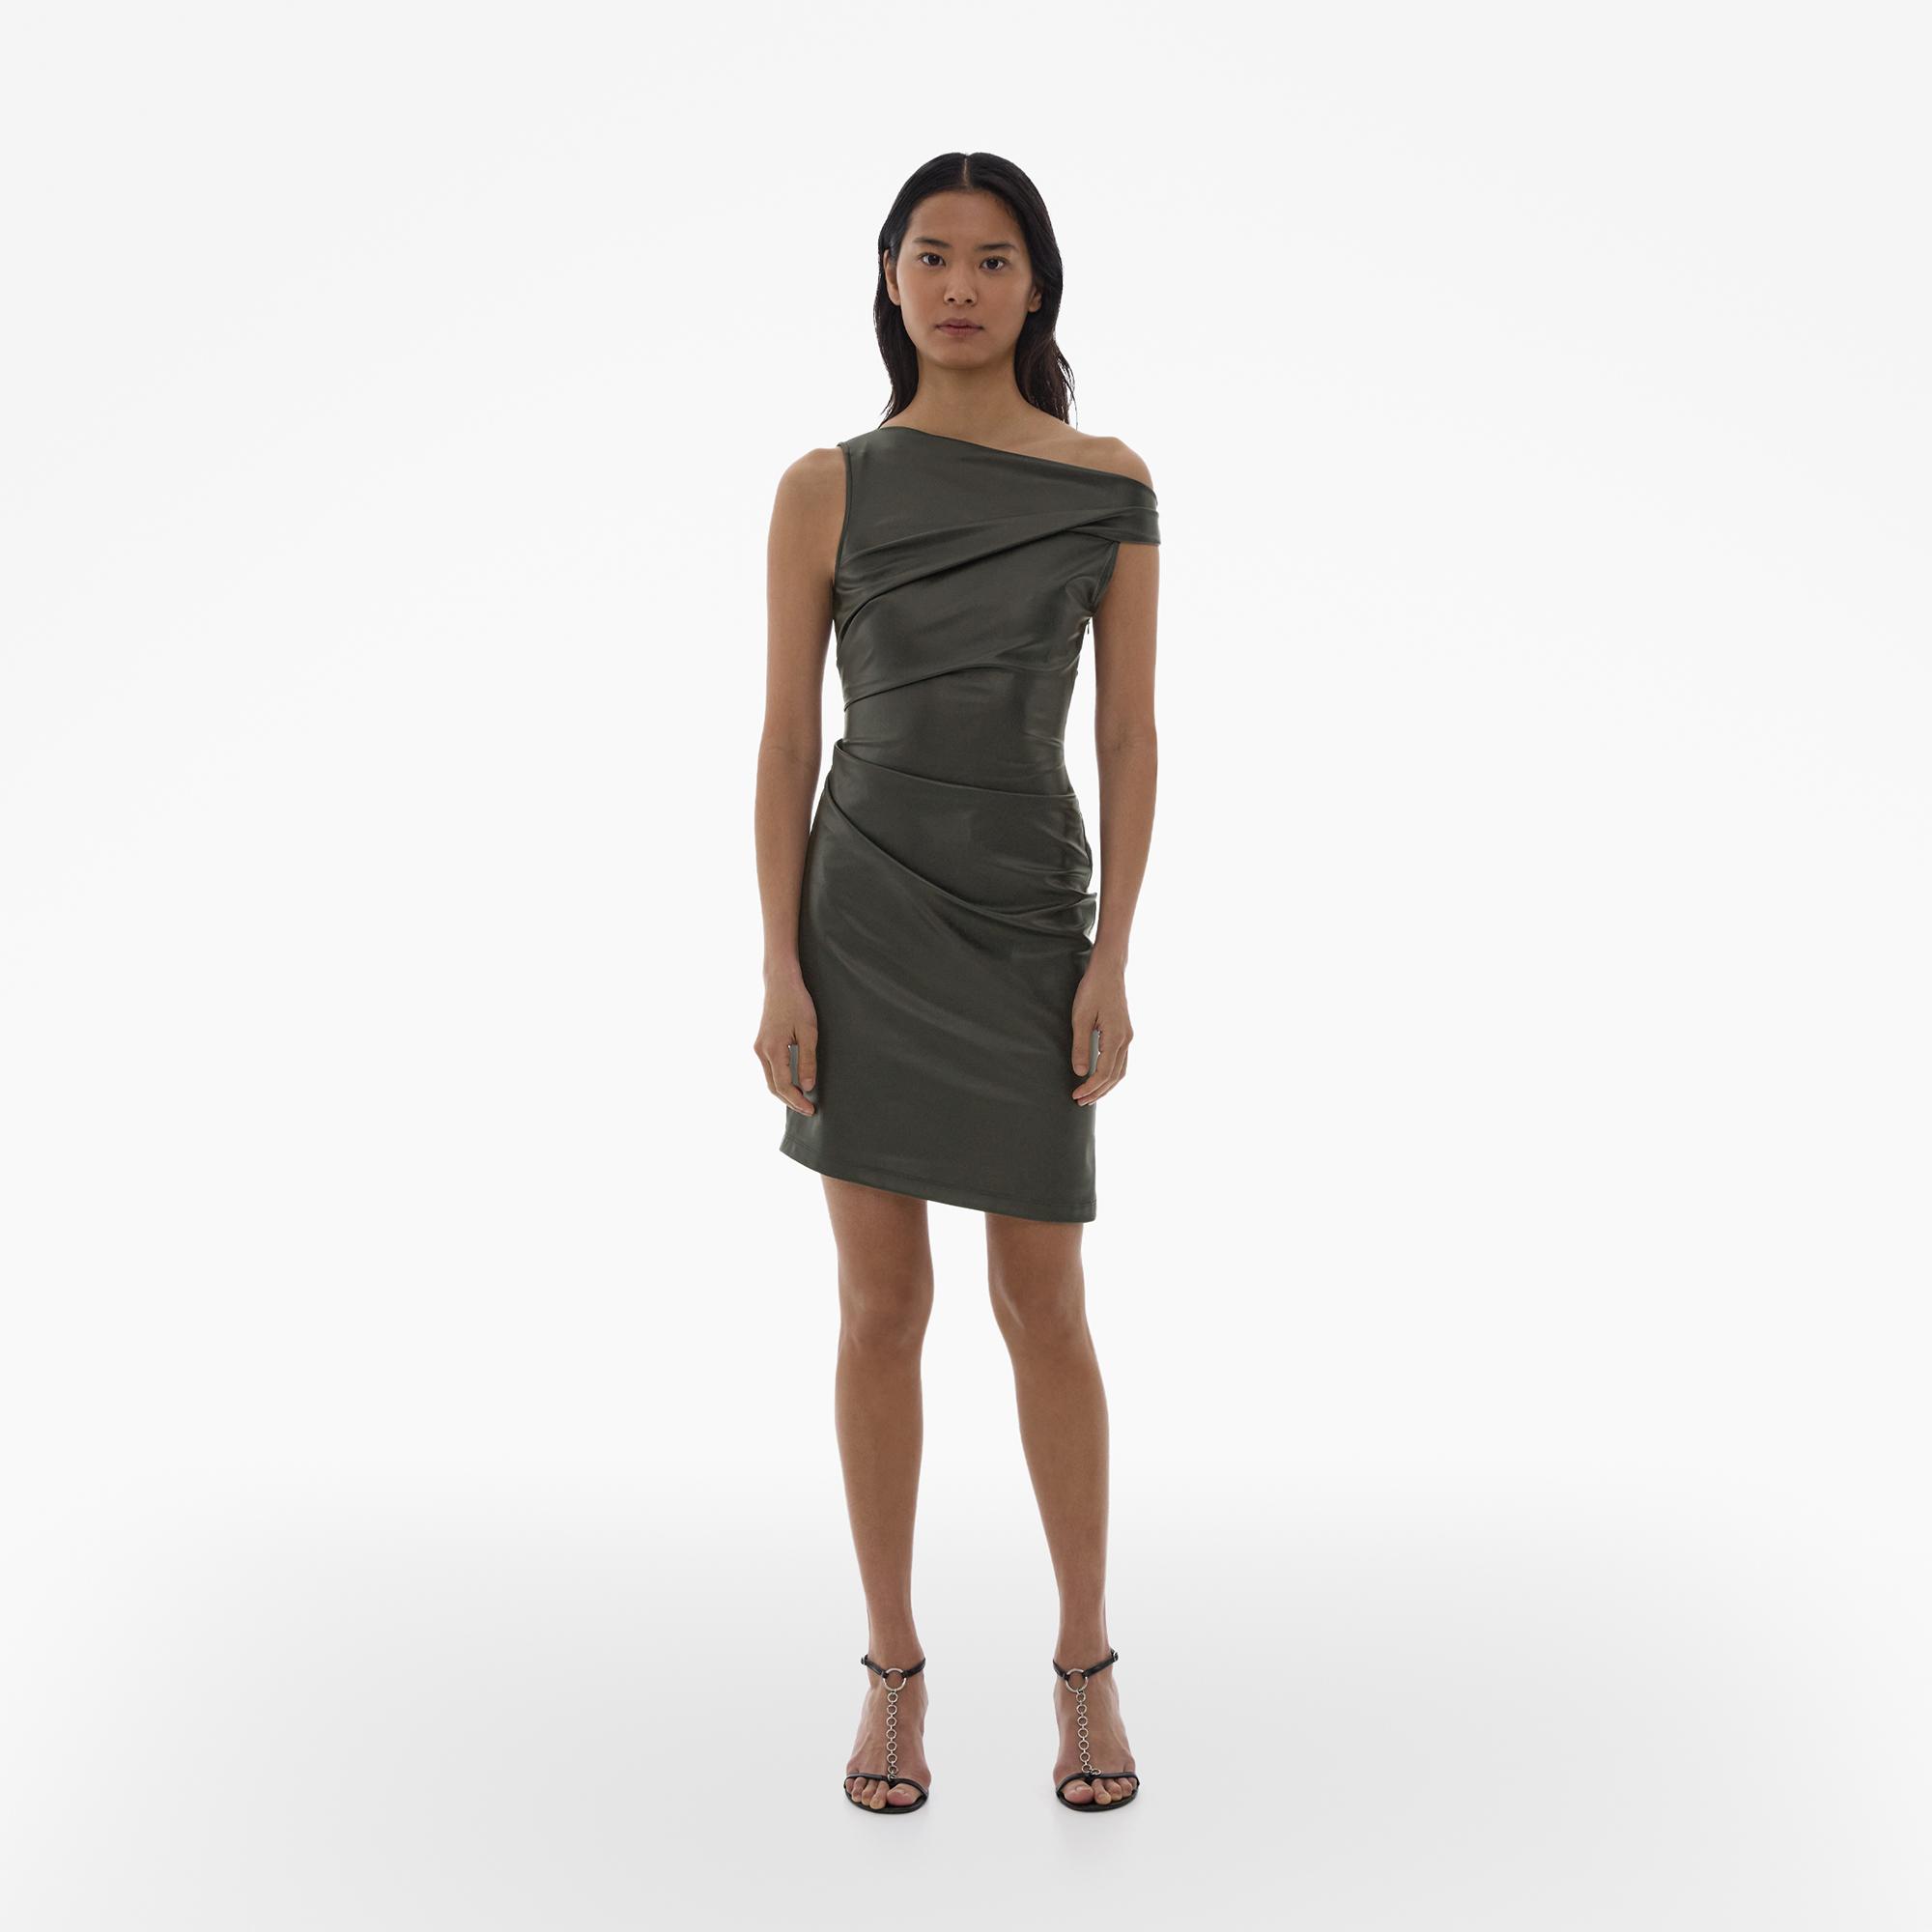 Helmut Lang Faux Leather Asymmetrical Dress In Olive